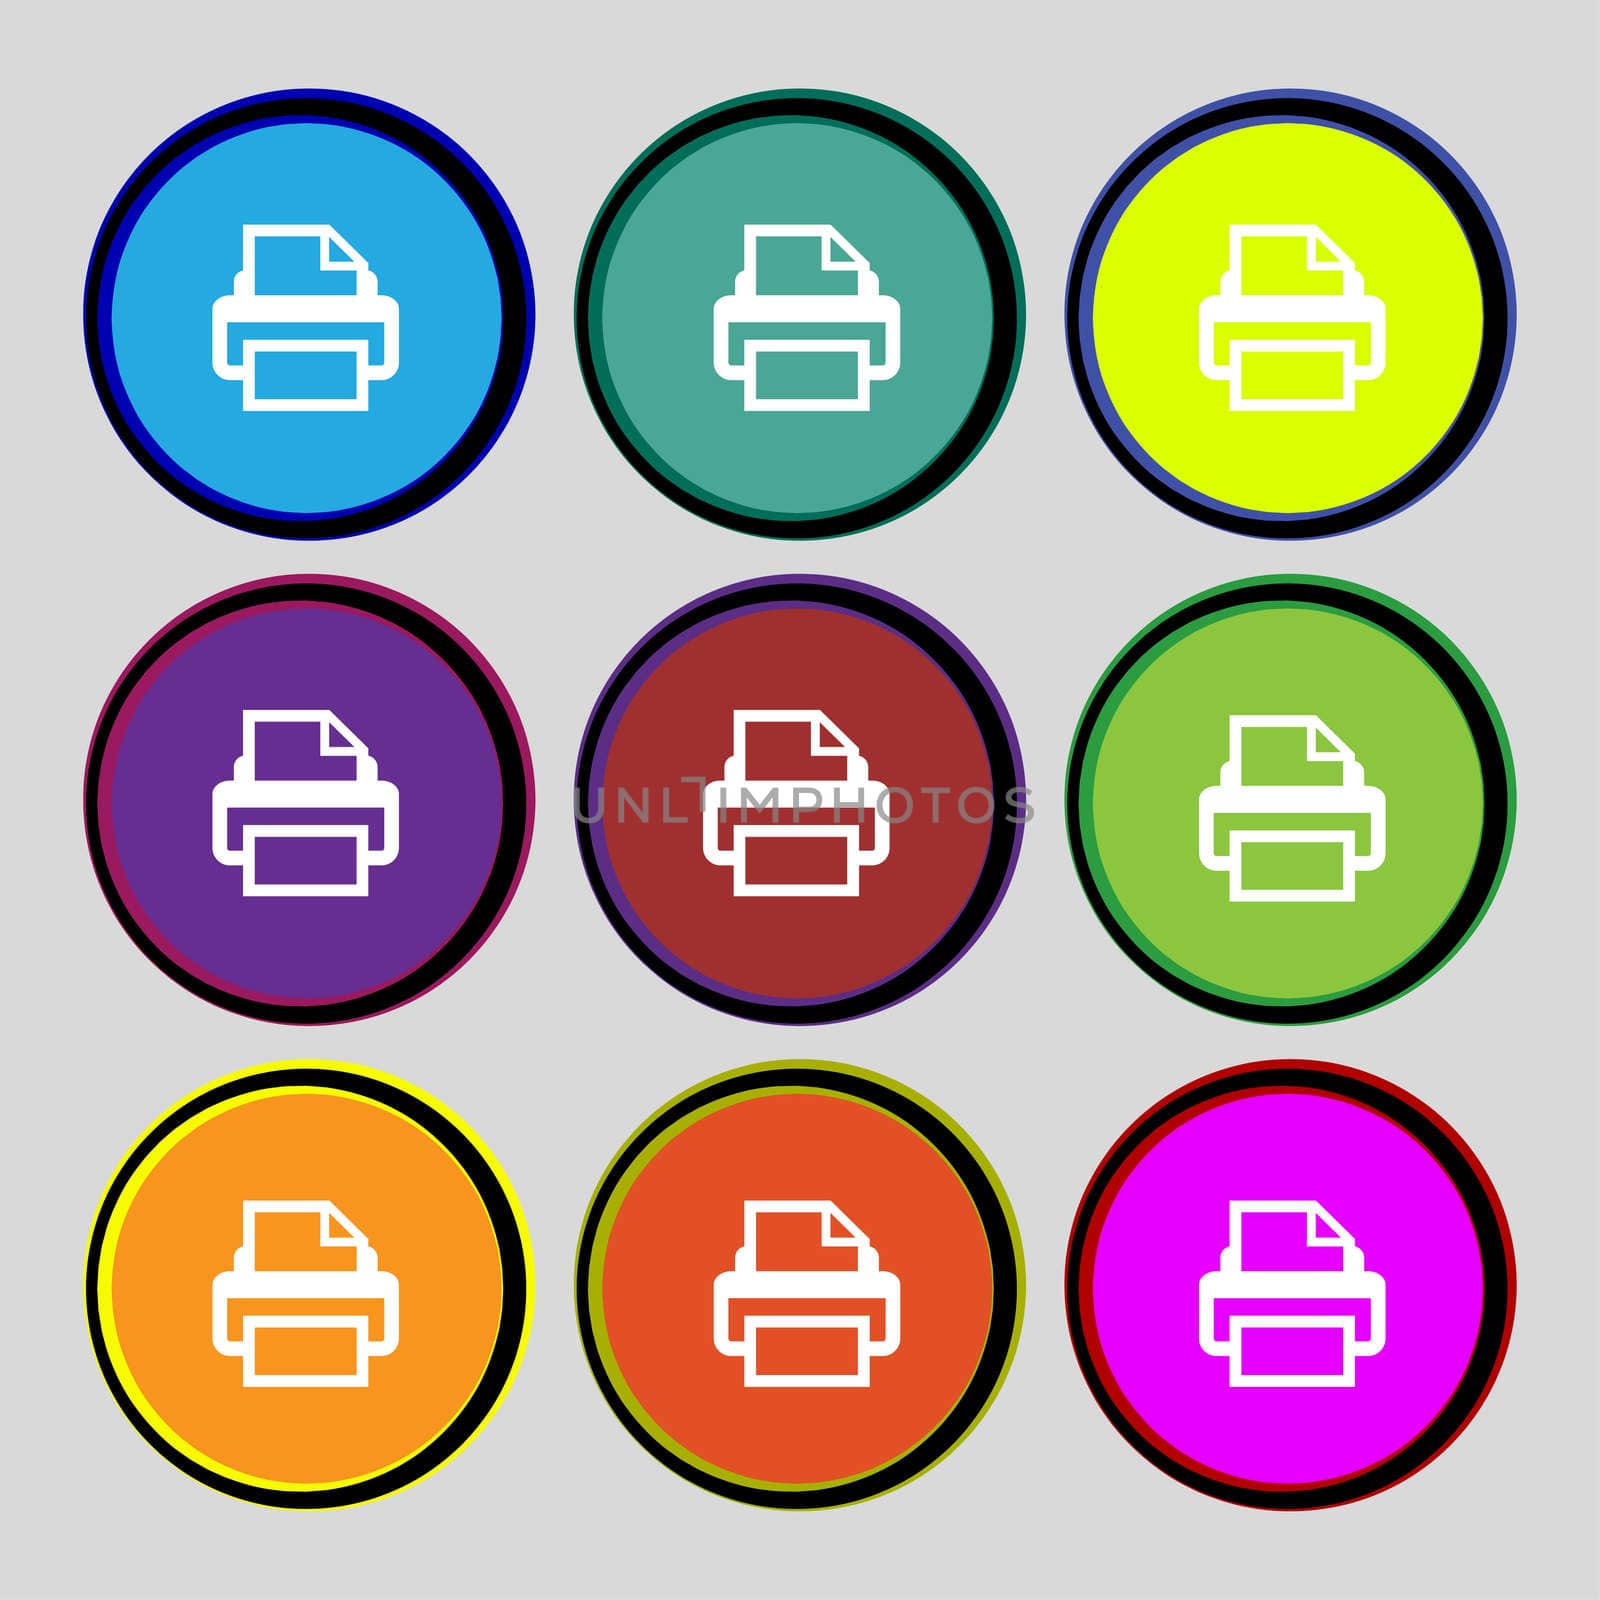 Print sign icon. Printing symbol. Set colourful buttons. illustration